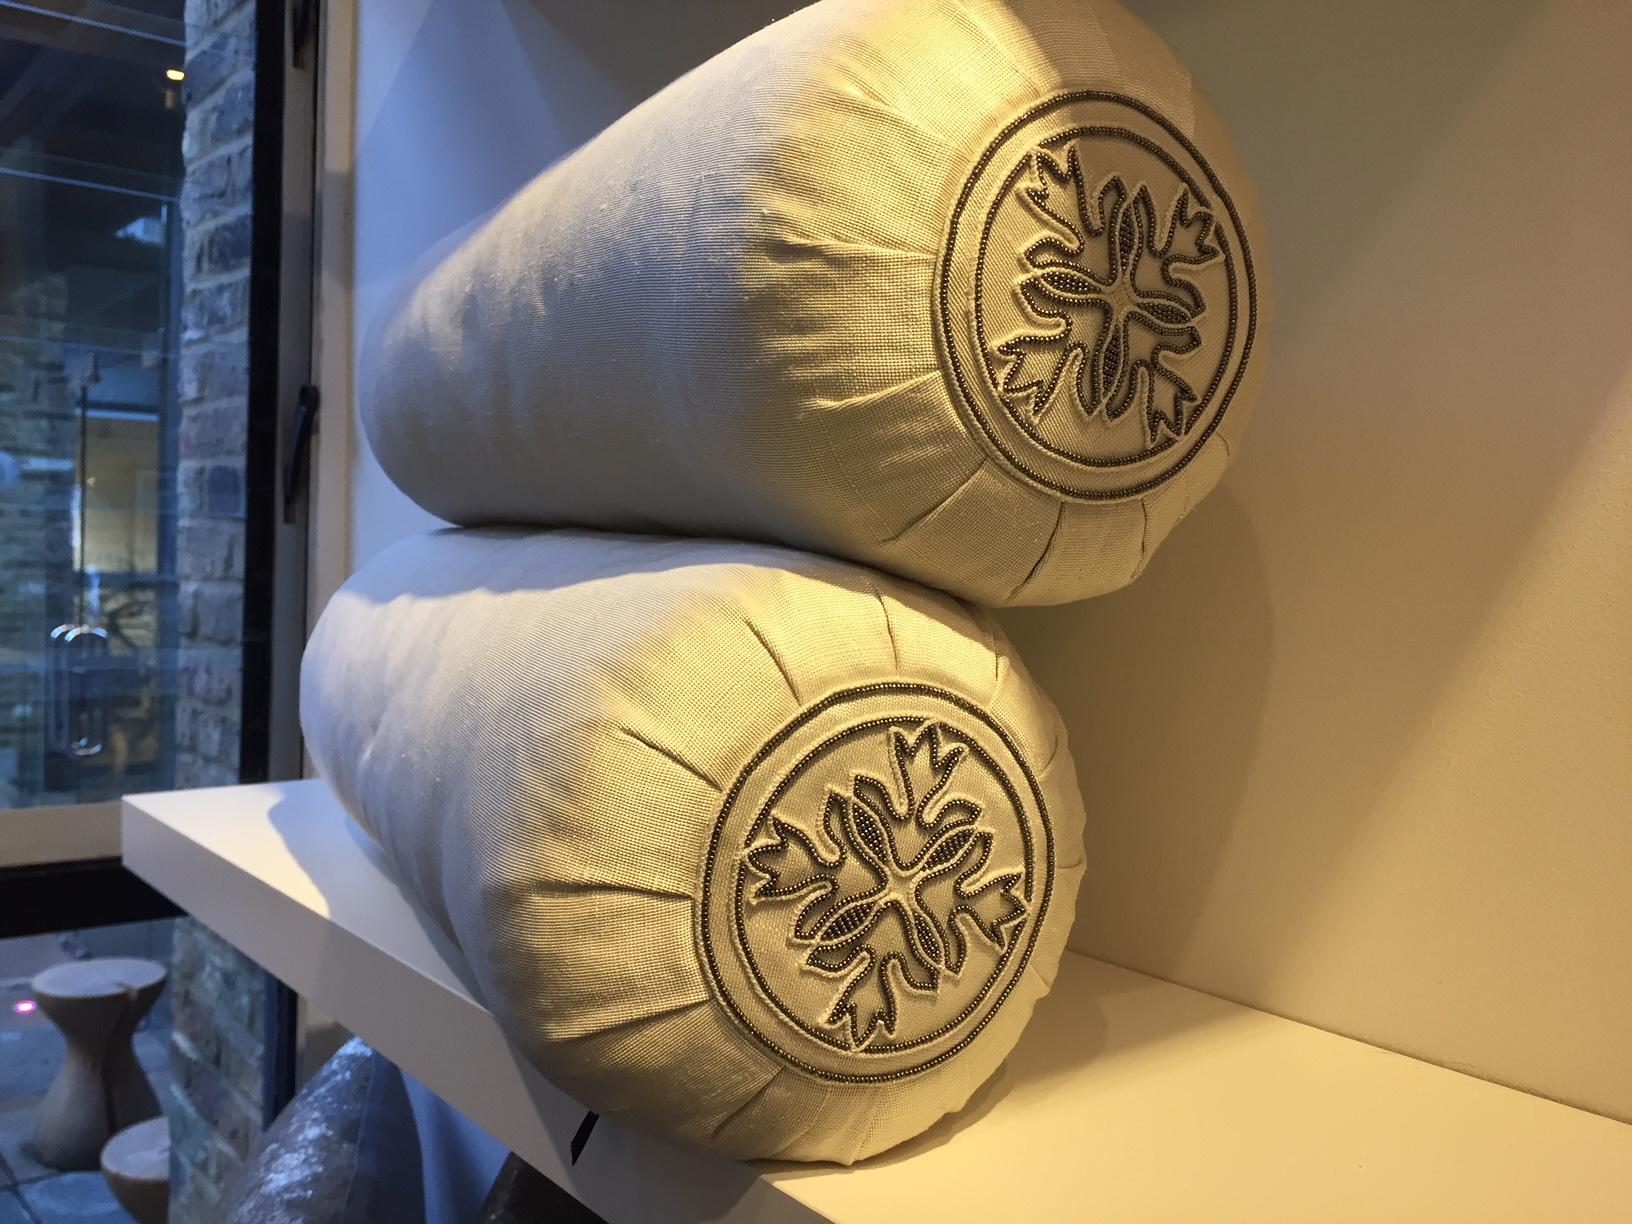 Silk Bolster cushions : Fabric hand woven silk col. Oyster with hand embroidery in grey silk yarn and silver beading on both ends of each bolster size about 62cm x 20cm,
Cushion cover lined with cotton lining and concealed zip, including bolster